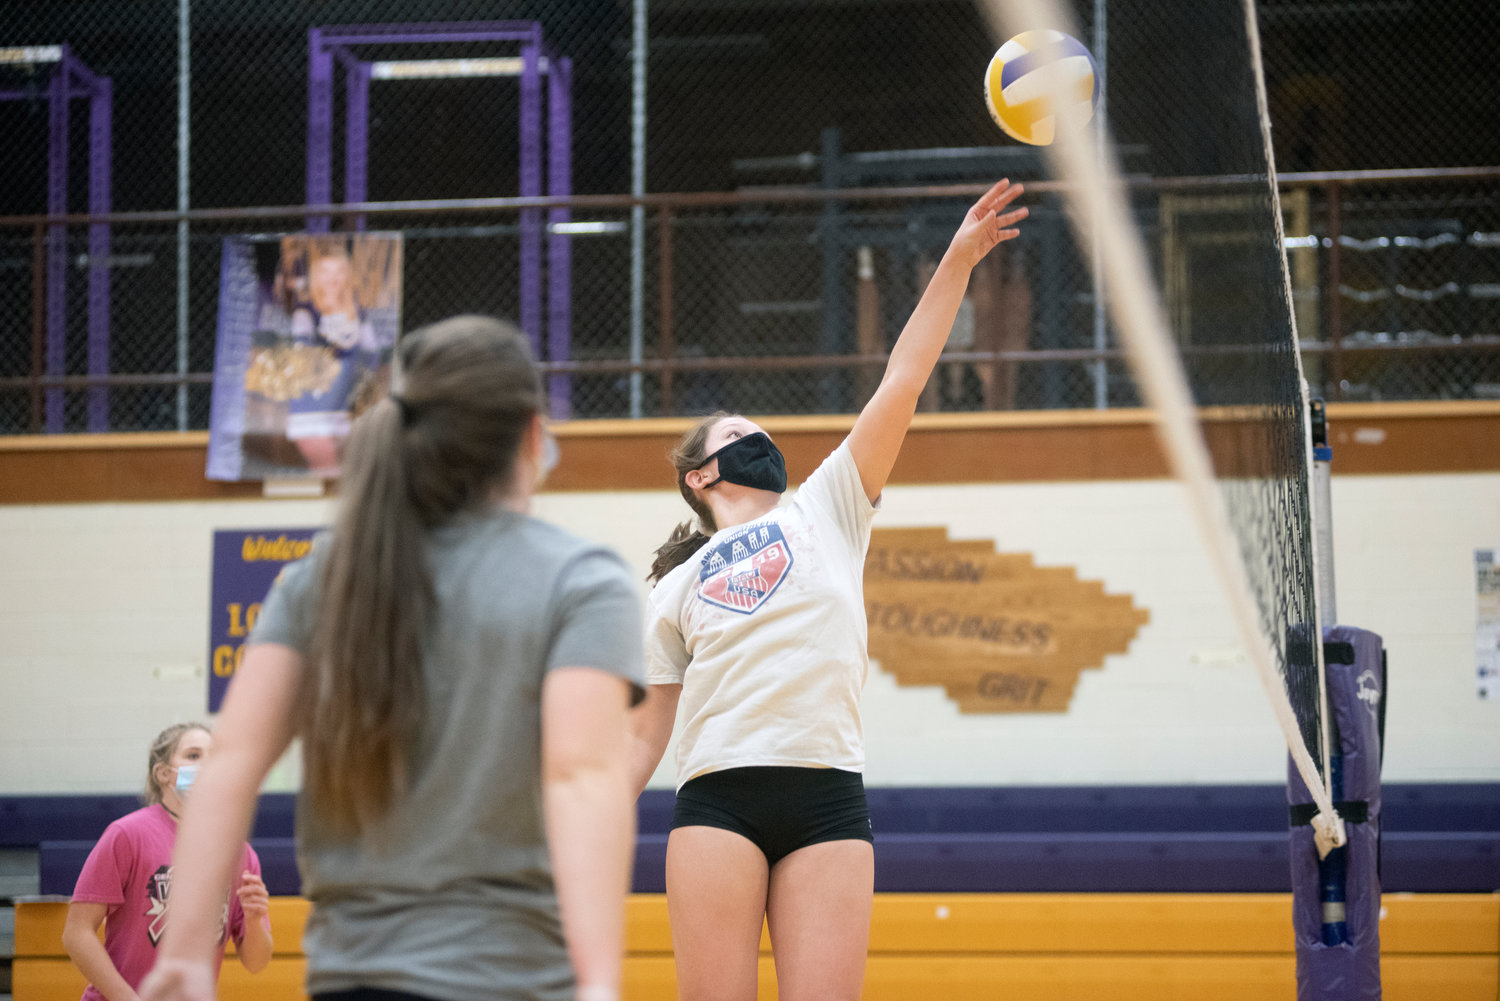 Onalaska junior Andi Oliver hits a ball at the net. Oliver transferred to Onalaska from a Class 4A school in Montana.